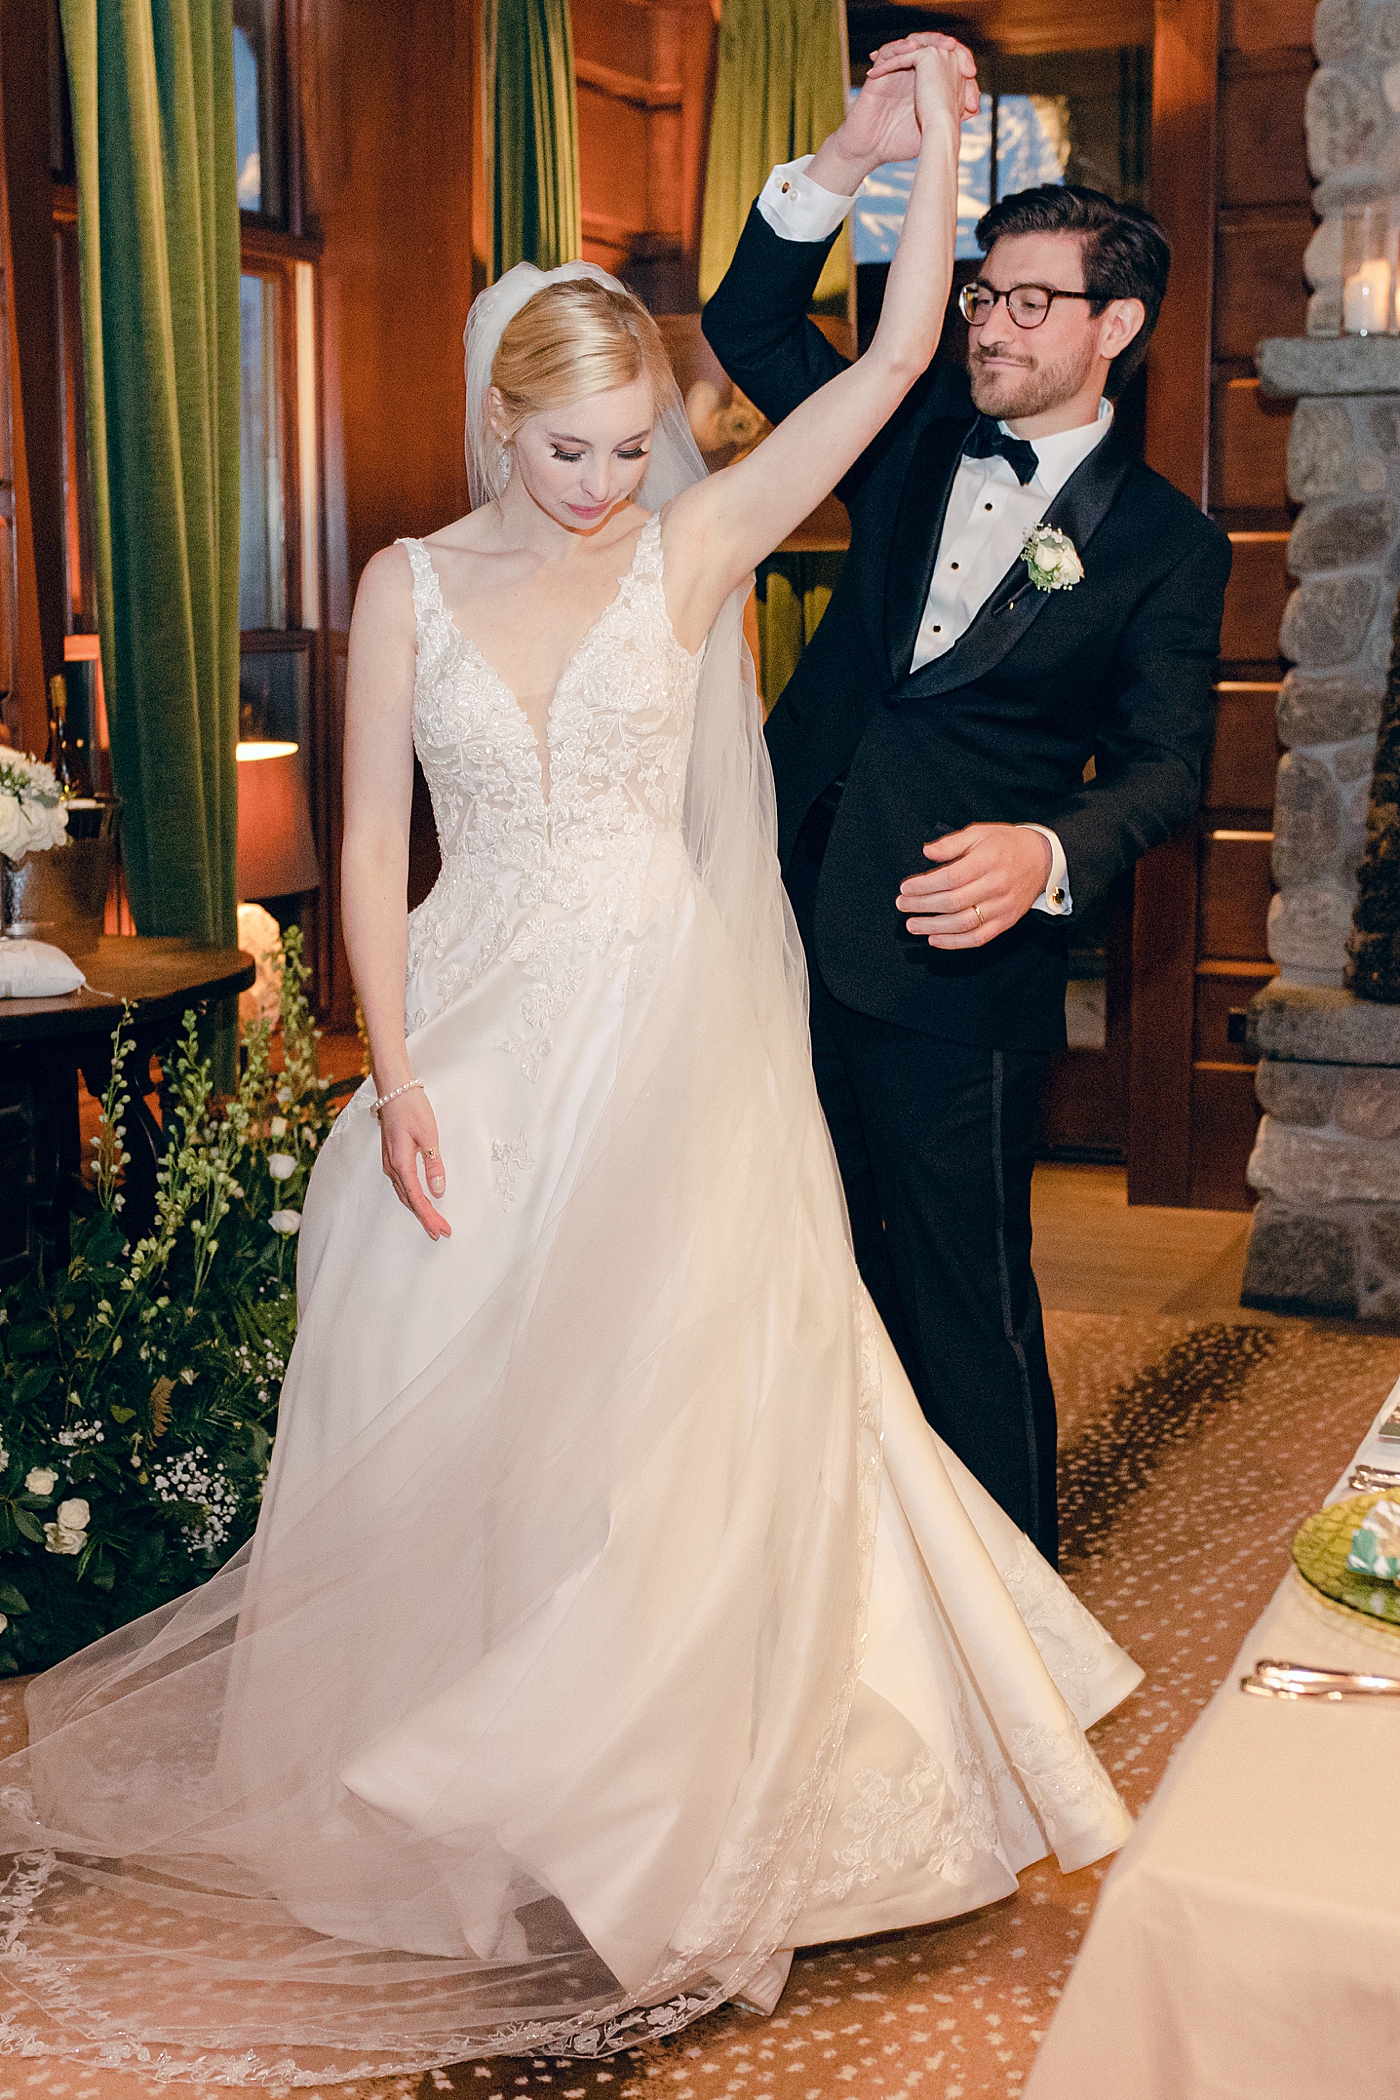 Bride and groom first dance during their Lake Placid Lodge Wedding | Image by Hope Helmuth Photography